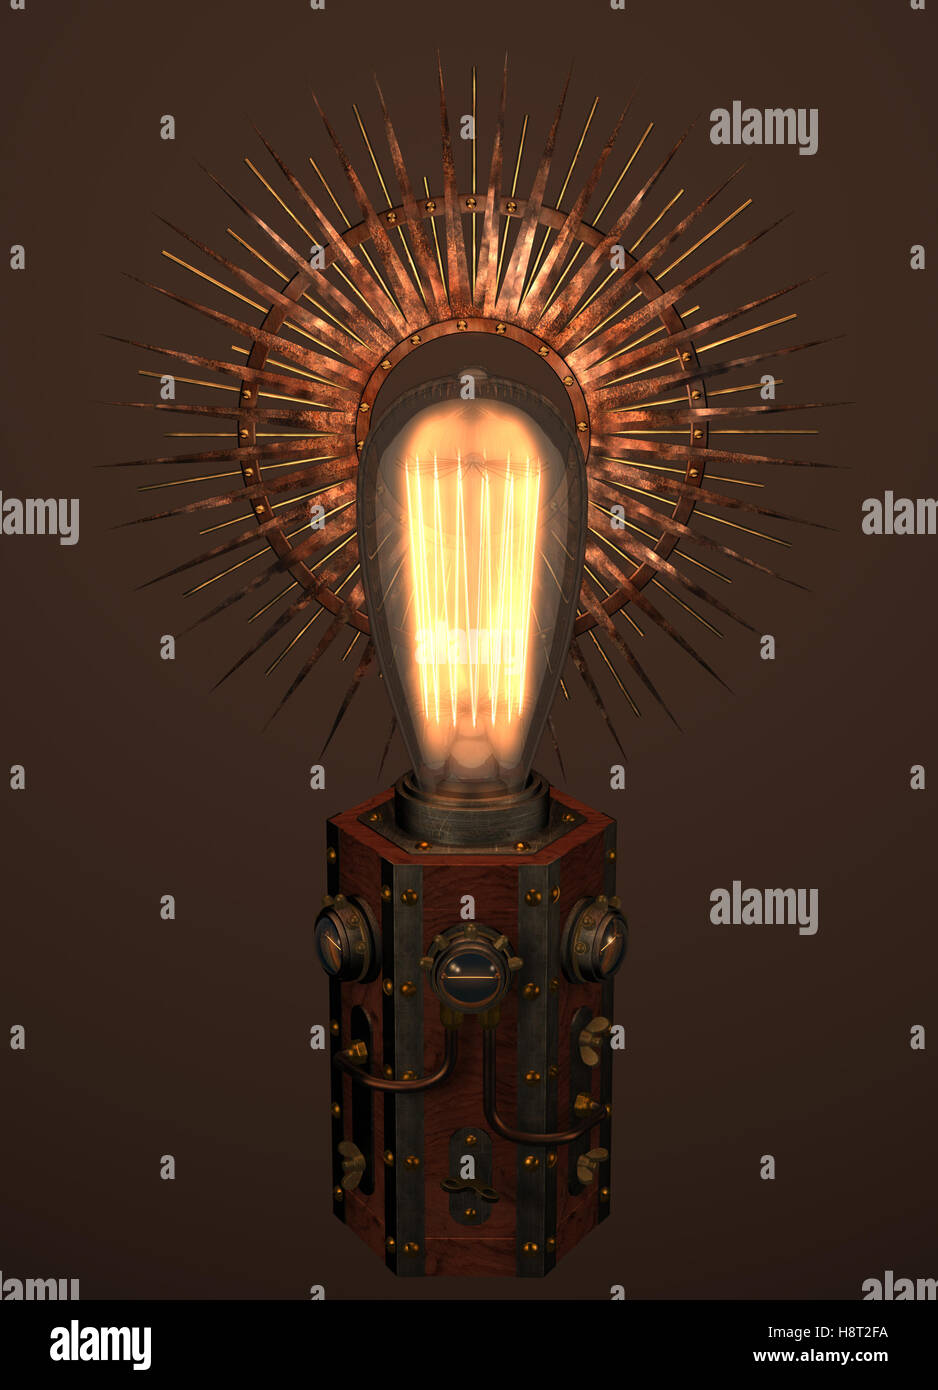 Rendered steampunk lamp with star (sun) decorative reflector Stock Photo